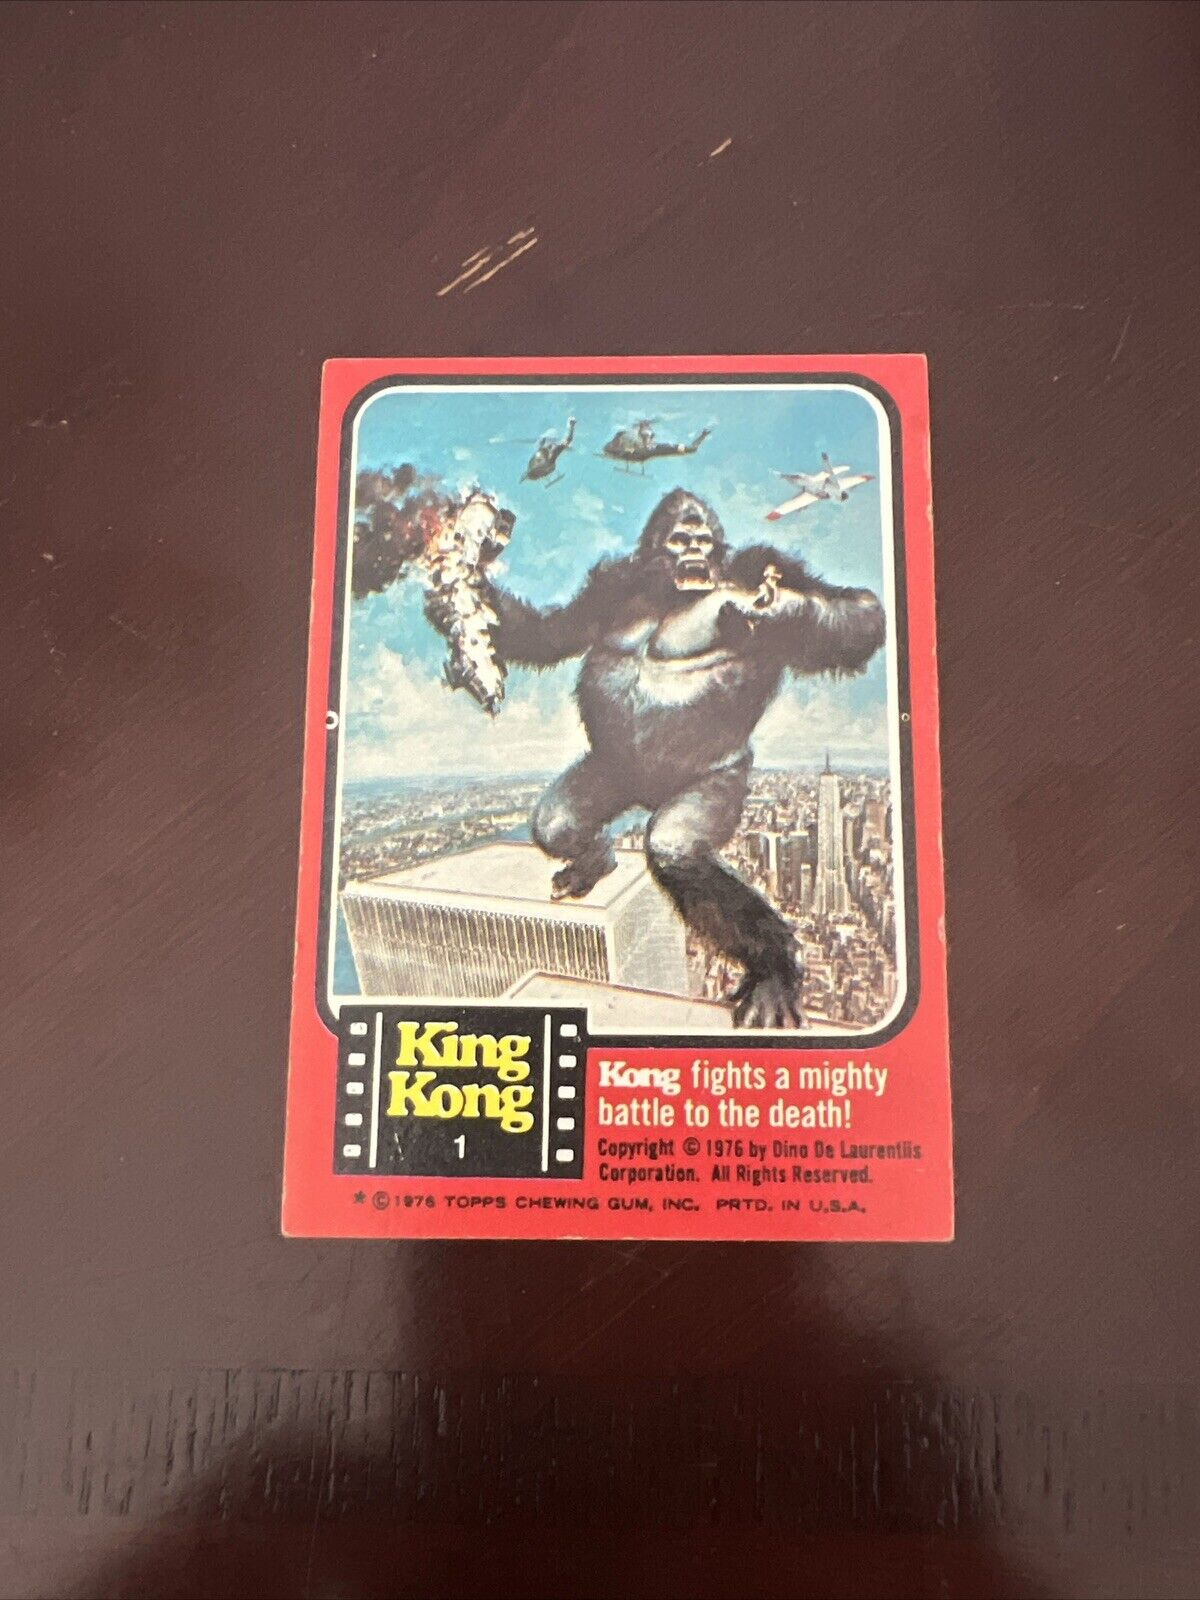 VINTAGE 1976 Topps KING KONG MOVIE TRADING CARDS RARE CARD #1 IN Excellent Cond.